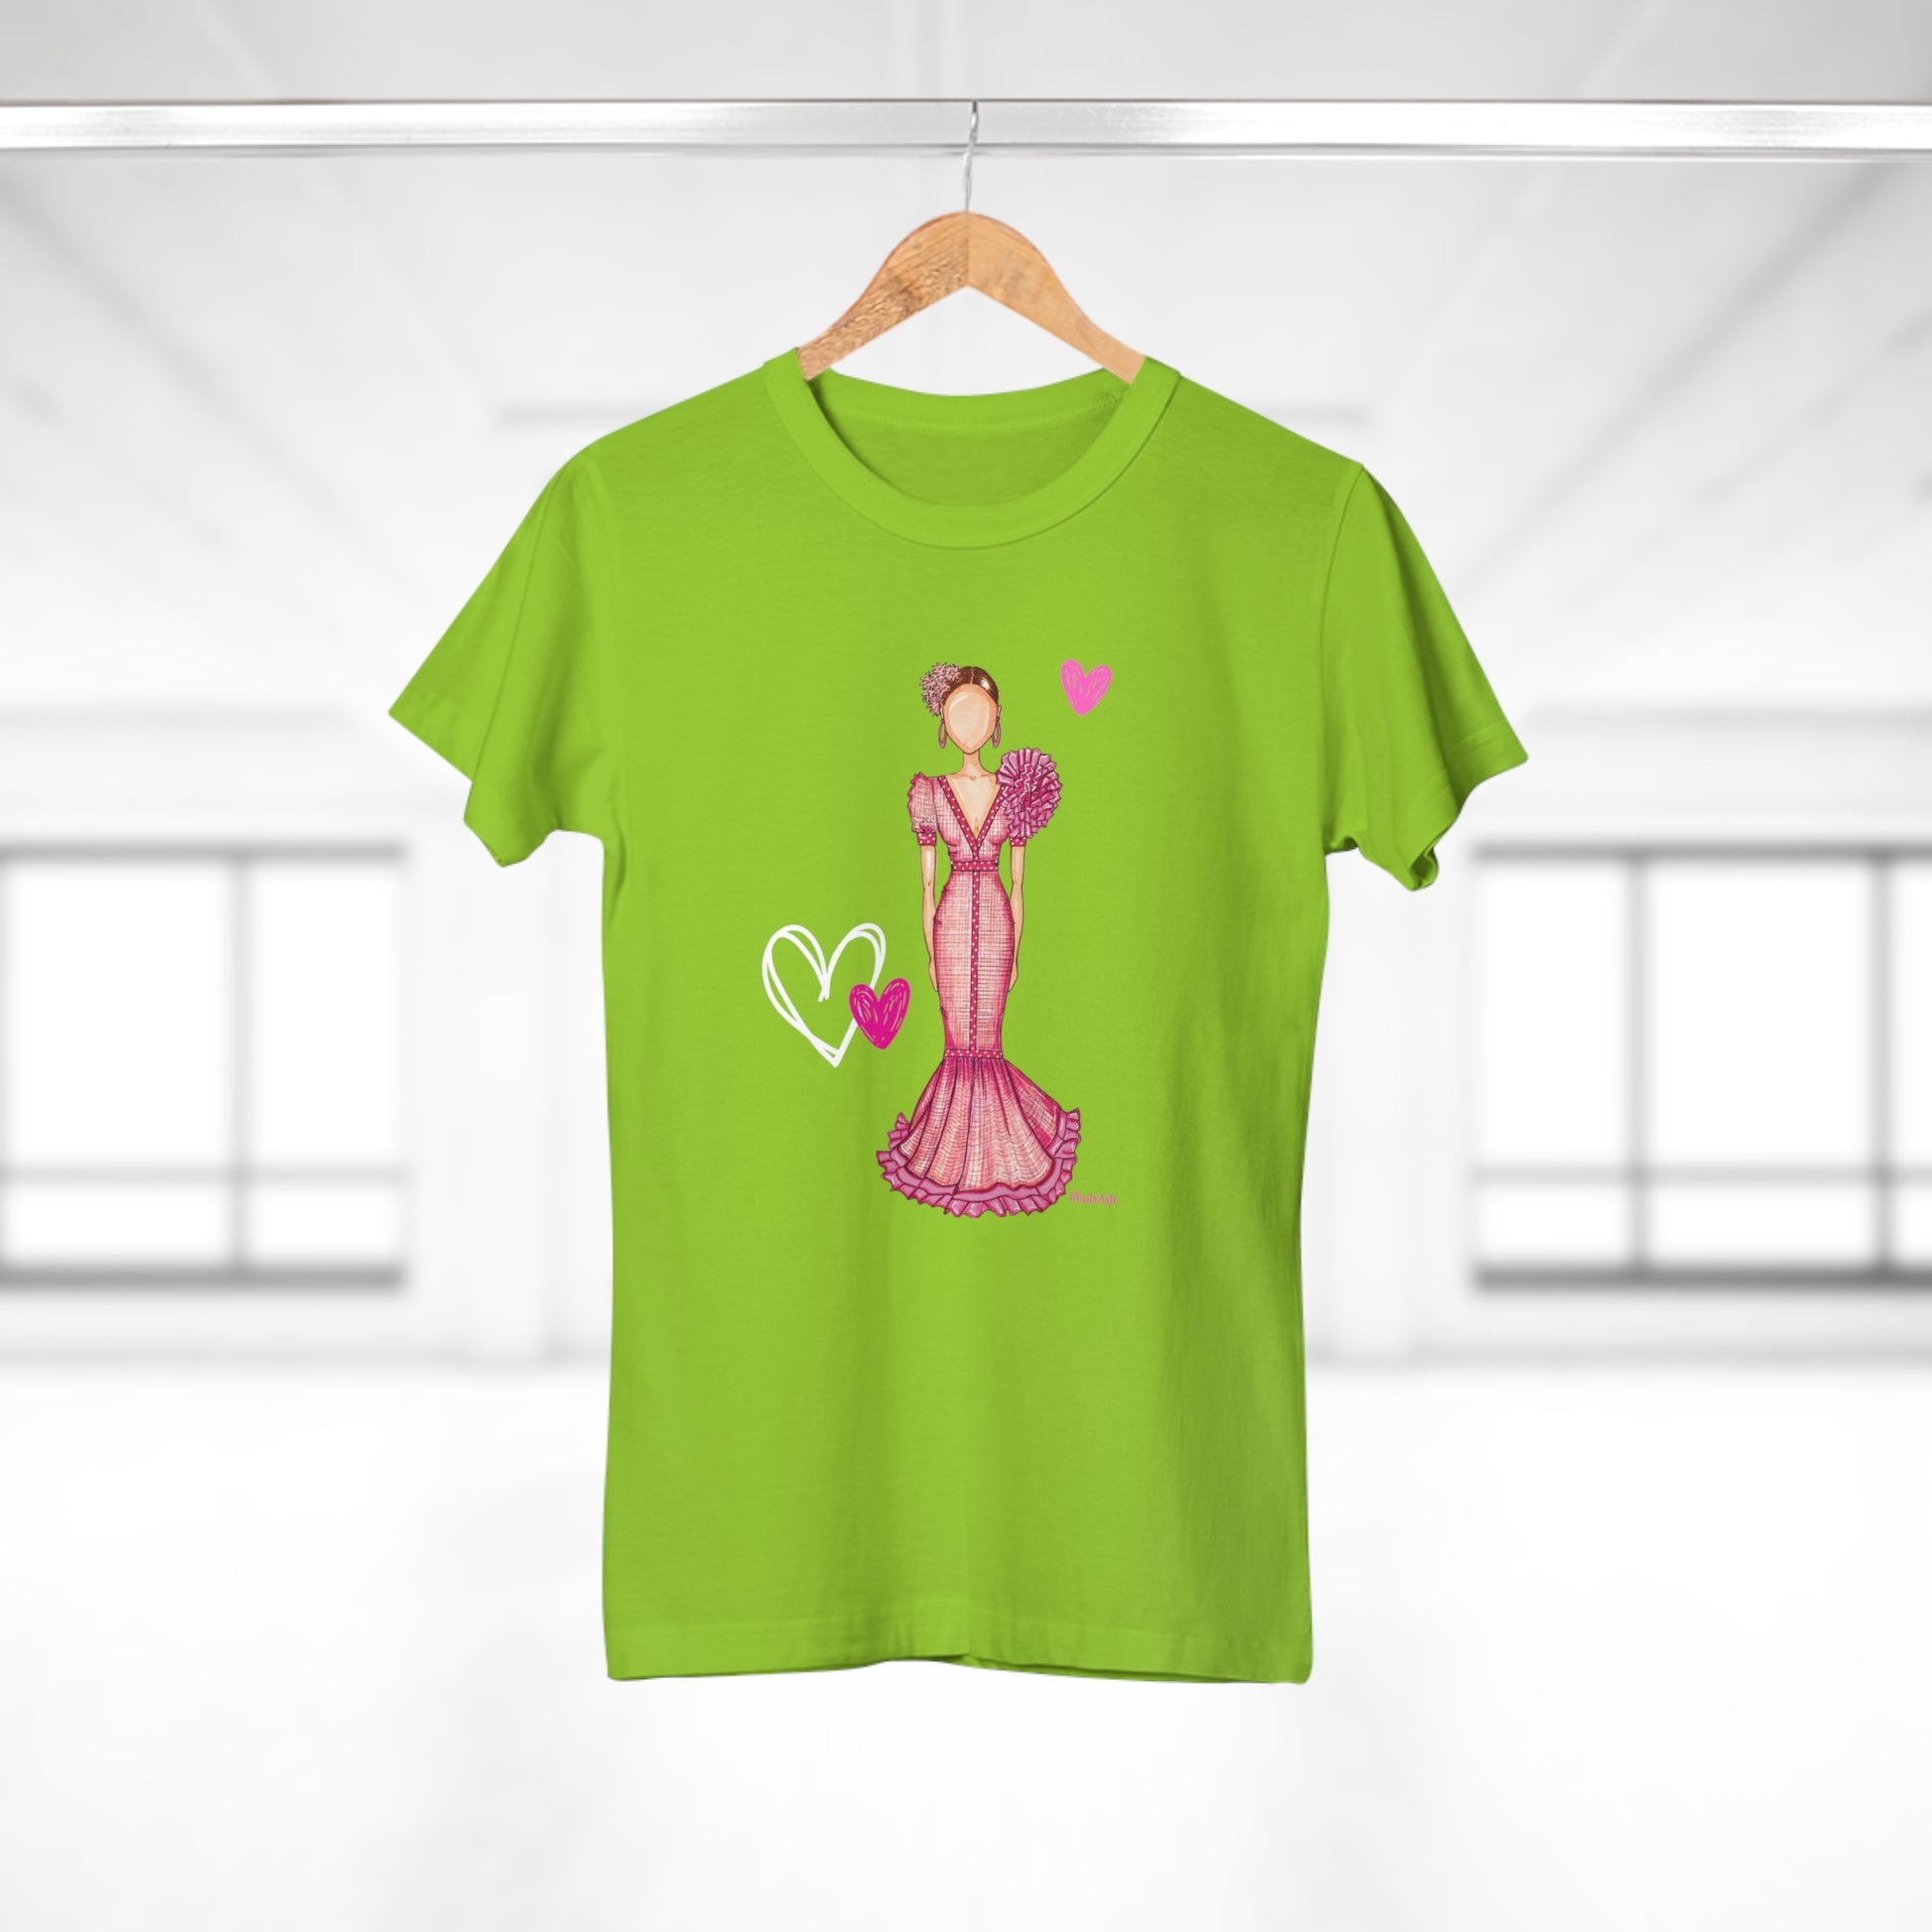 a green t - shirt with a picture of a woman in a pink dress